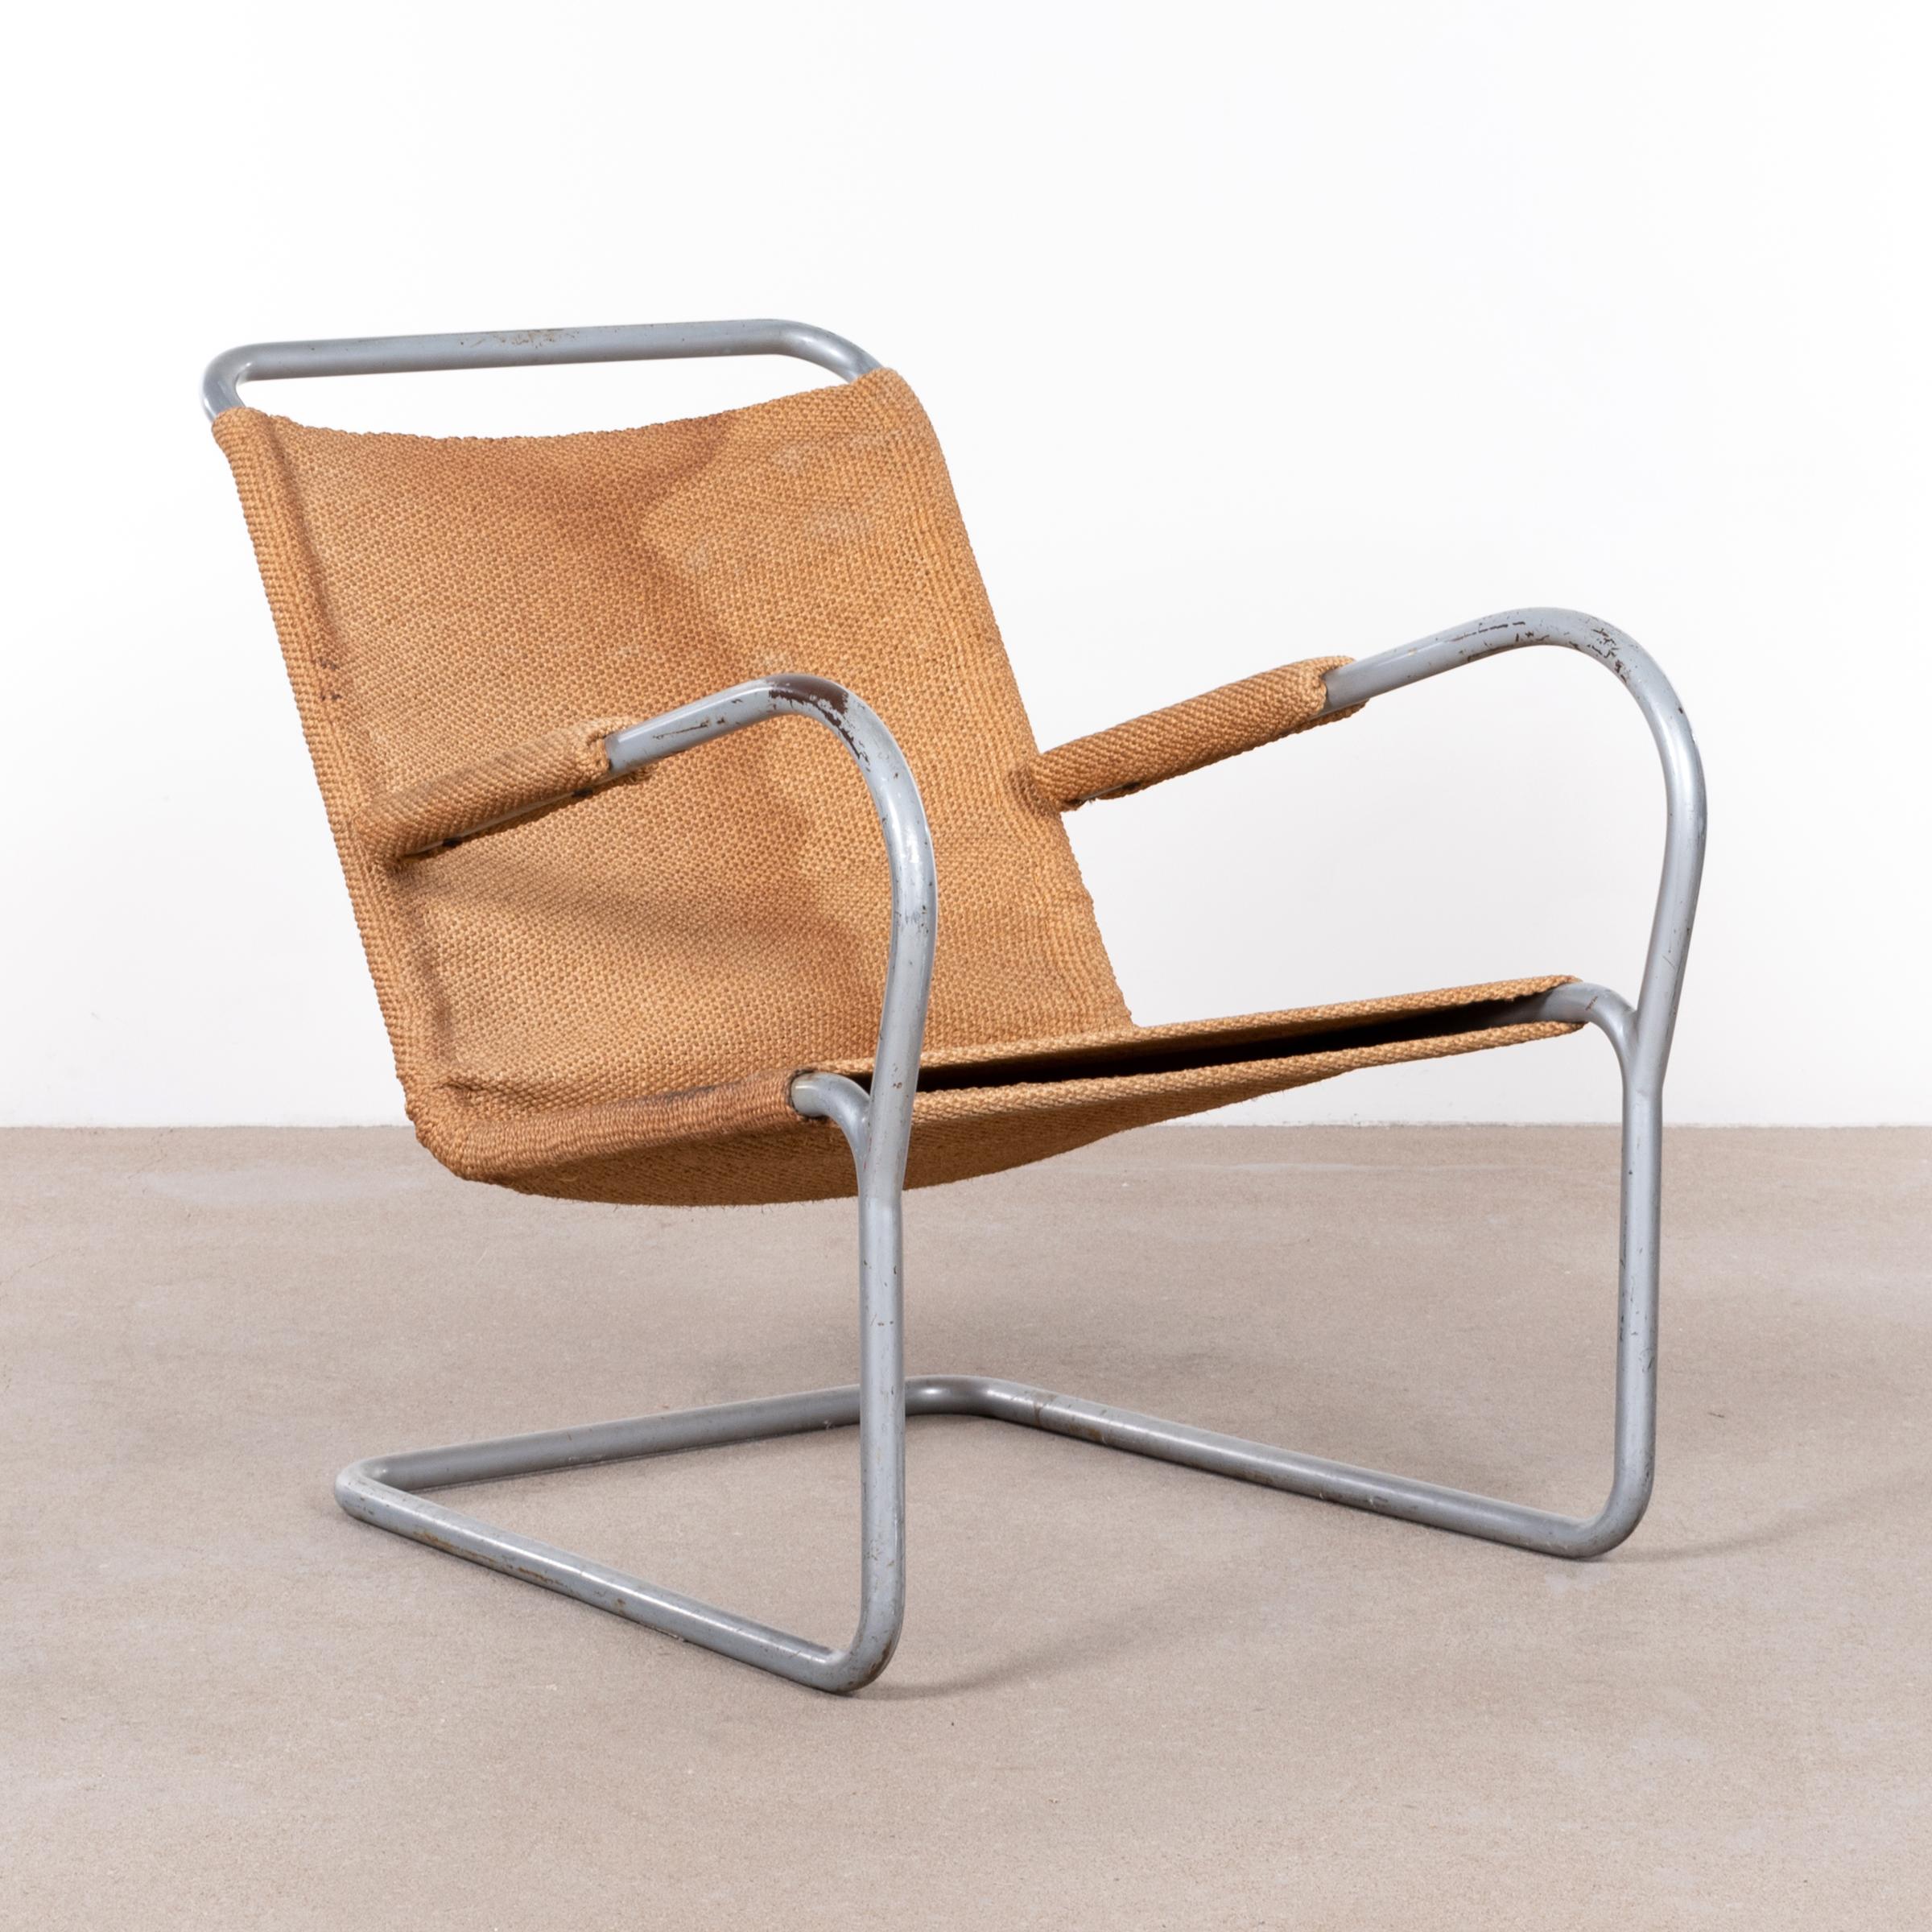 Lounge chair by Bas Van Pelt. Tube steel frame with grey finish and brown burlap upholstery. The lounge chair has a great raw Industrial look and is in used but fair original condition. Rare find!
Chair in collection of Central Museum Utrecht,